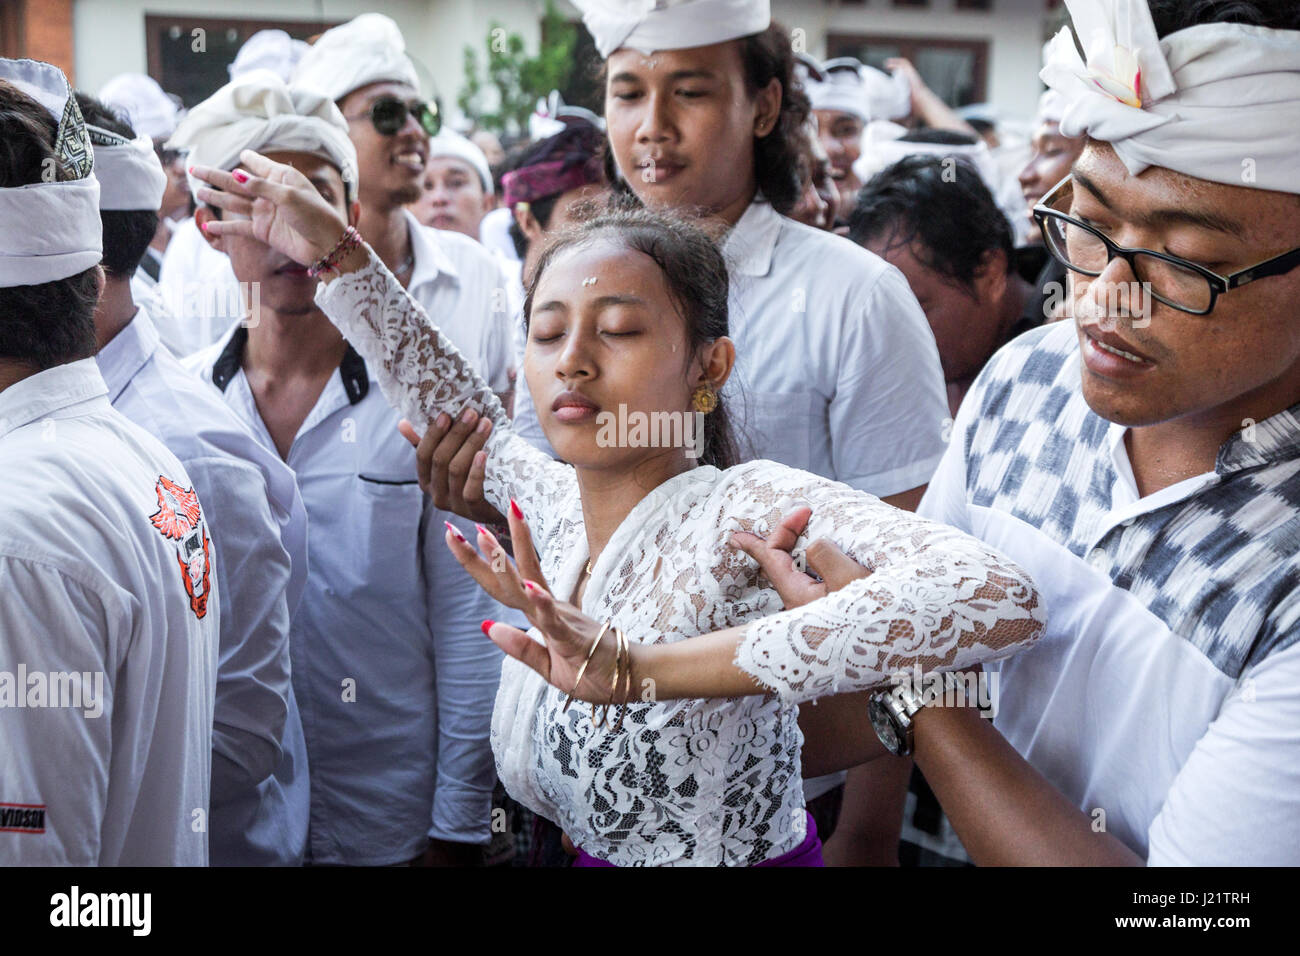 Kesiman, Denpasar, Bali, Indonesia. 23rd Apr, 2017. Balinese woman in a trance during the self stabbing ritual (Sakral) at the Pengerebongan Ceremony. This ritual takes place every 210 days on the Balinese Hindu Saka calendar which entails prayers and offerings at the Temple, a parade of mythological characters and men and women in trance with some men attempting to pierce their skin with a traditional Keris (knife), fortunately nobody gets hurt at this incredible Balinese Ceremony at Pura Petilan Temple, Denpasar, Indonesia. Credit: Antony Ratcliffe/Alamy Live News. Stock Photo